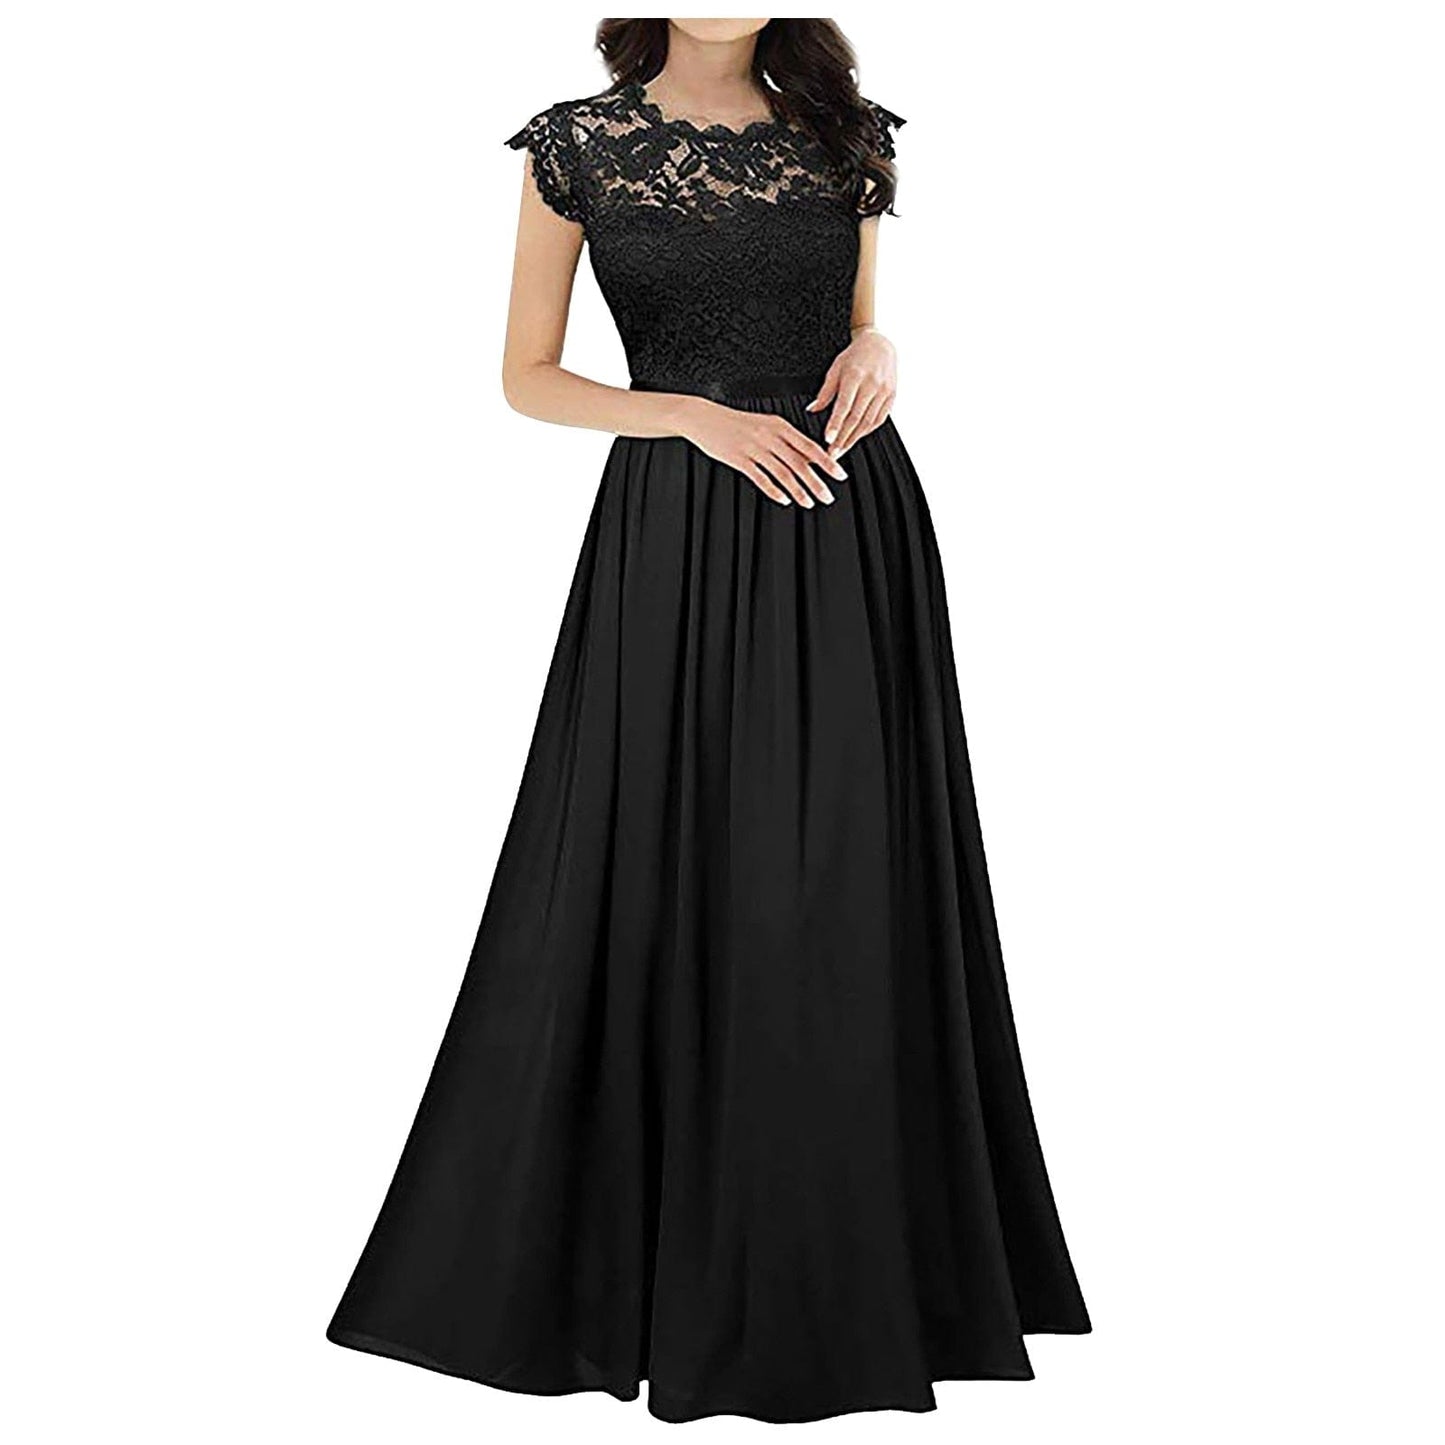 Floral Lace Patchwork Maxi Dress Ladies Stitching Bridesmaids Wedding Party Dress Sleeveless Pleated Dress  Gowns - Dresses